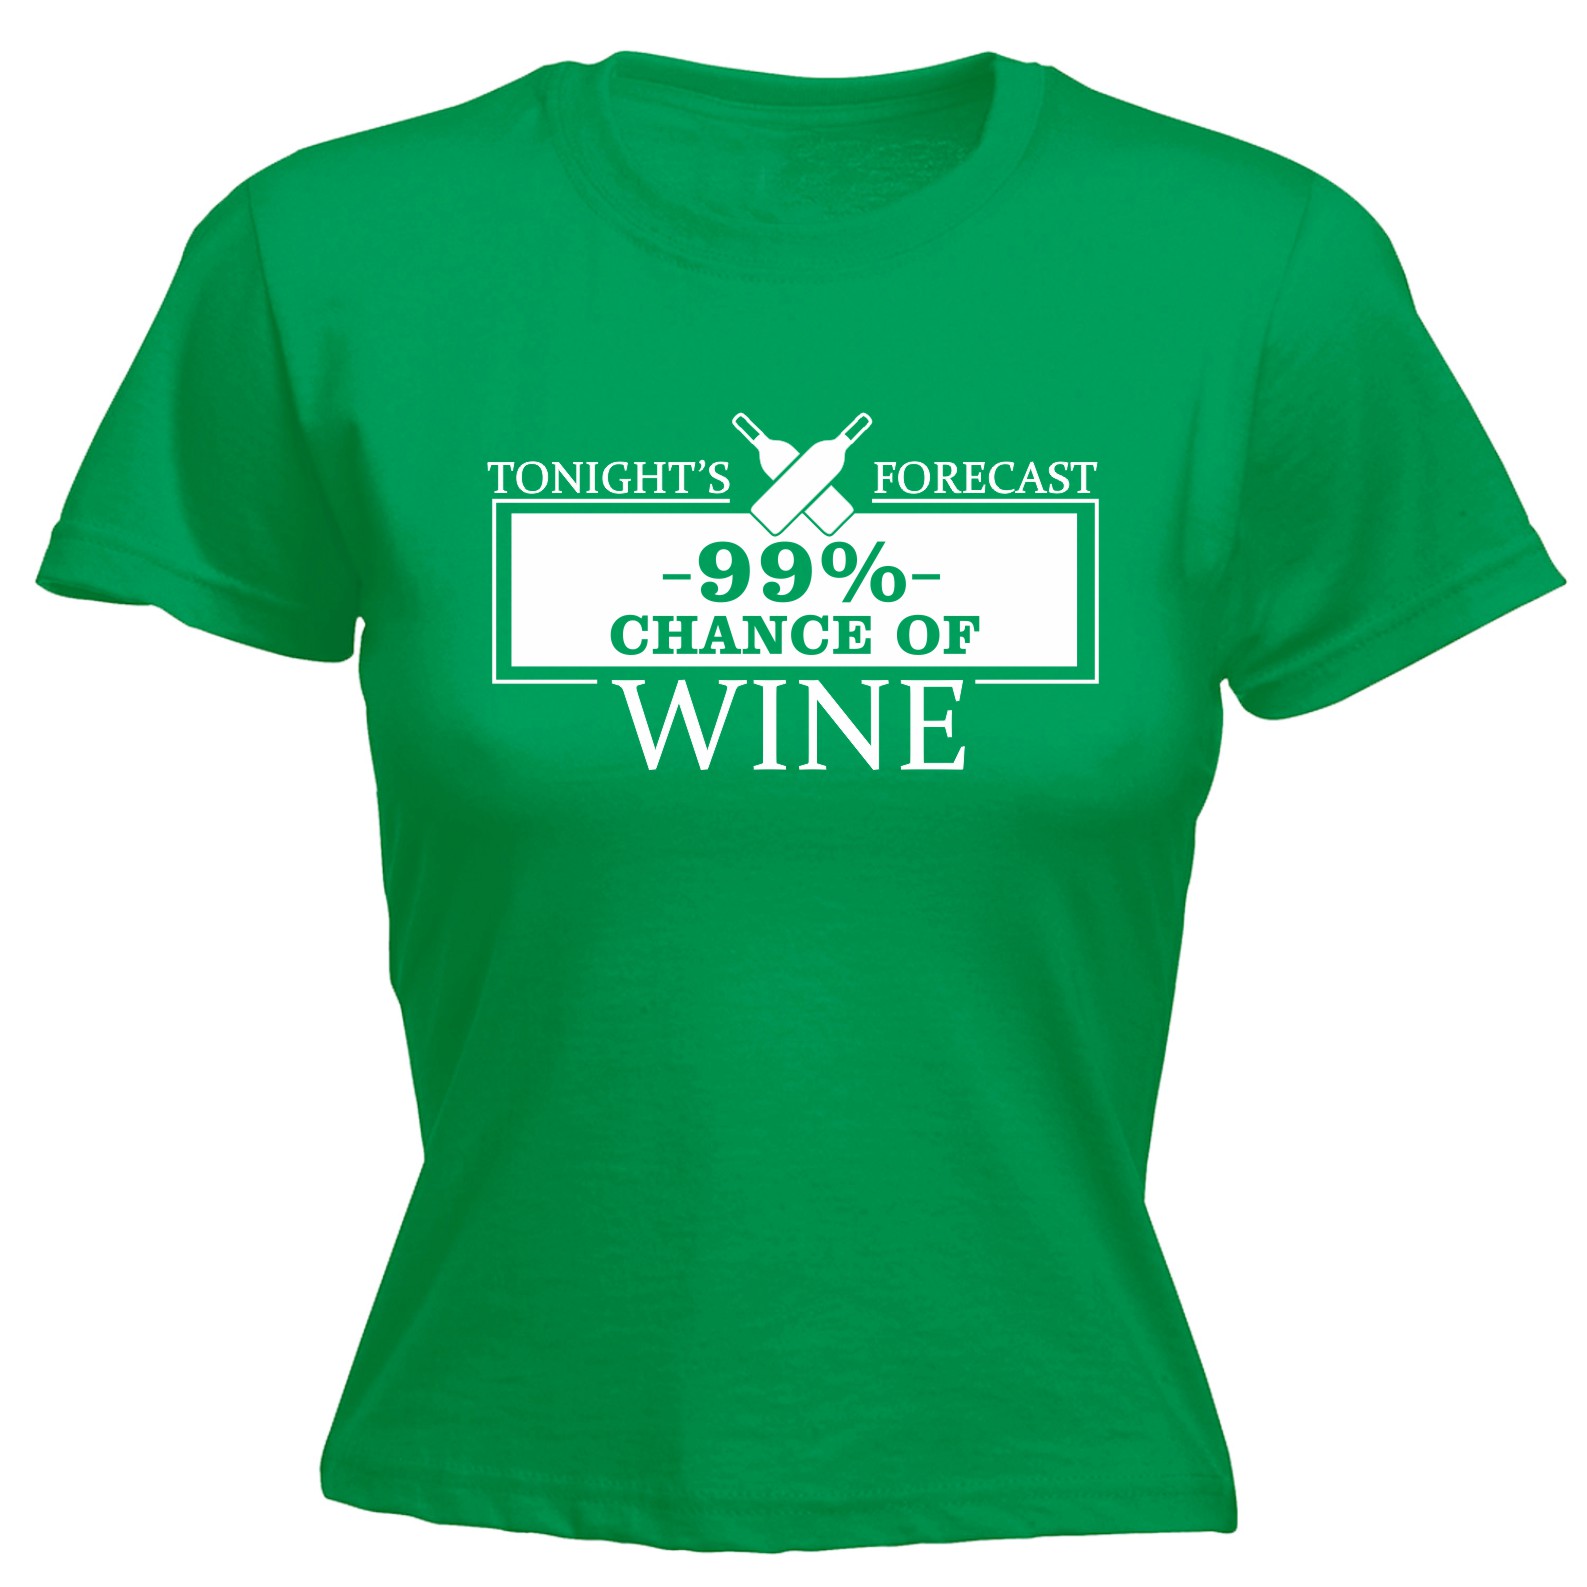 thumbnail 3 - Tonight Forecast 99% Chance Of Wine Funny Joke Adult Humour FITTED T-SHIRT Cool